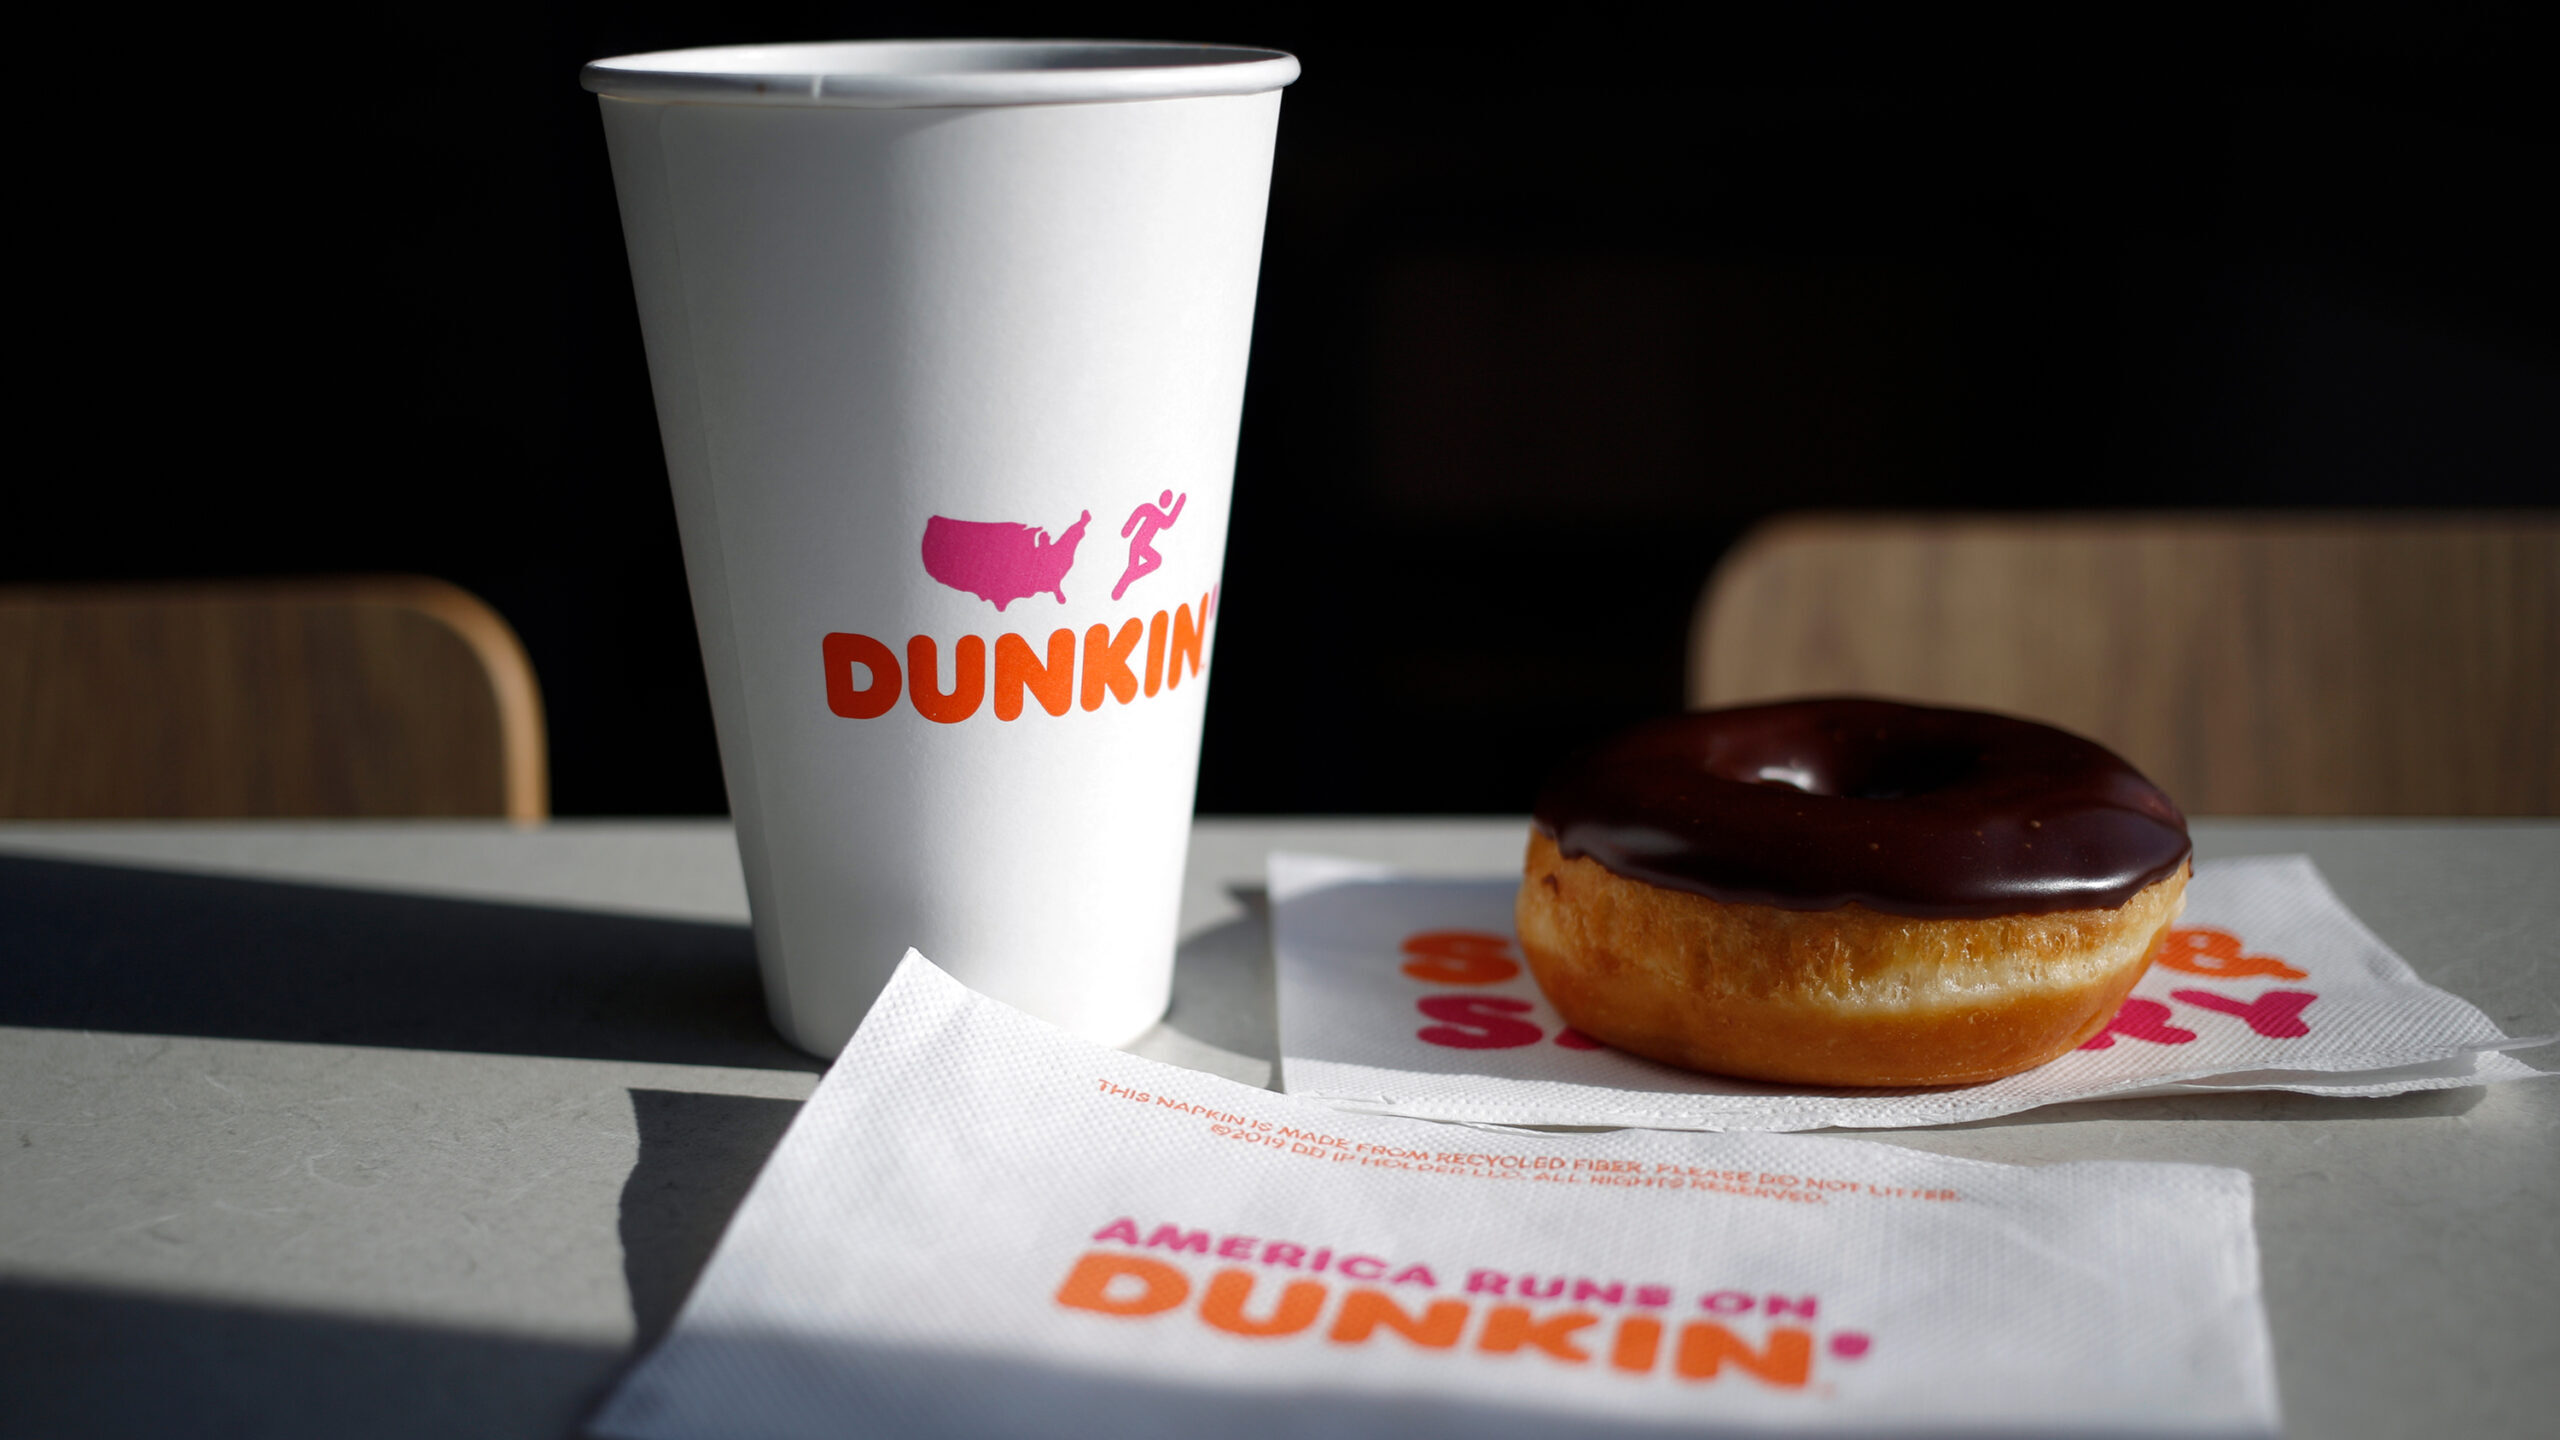 One of Dunkin's most recognizable drinks has disappeared. The Dunkaccino has quietly been pulled fr...